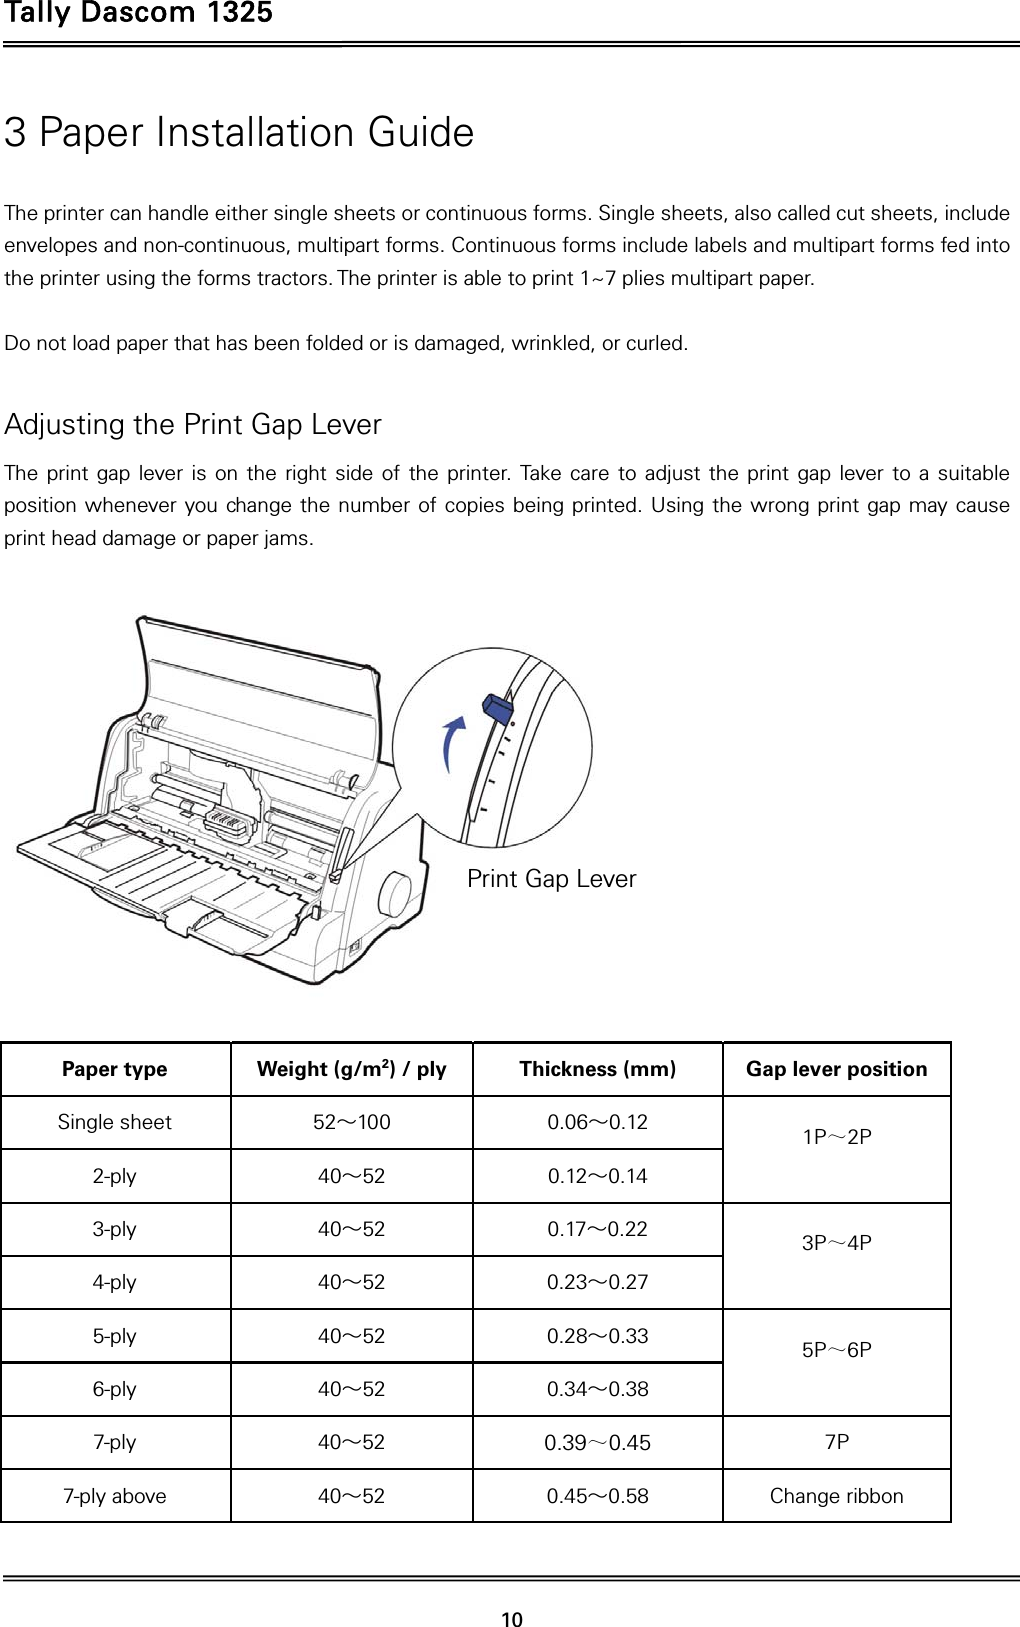 Tally Dascom 1325   10  3 Paper Installation Guide  The printer can handle either single sheets or continuous forms. Single sheets, also called cut sheets, include envelopes and non-continuous, multipart forms. Continuous forms include labels and multipart forms fed into the printer using the forms tractors. The printer is able to print 1~7 plies multipart paper.  Do not load paper that has been folded or is damaged, wrinkled, or curled.  Adjusting the Print Gap Lever The print gap lever is on the right side of the printer. Take care to adjust the print gap lever to a suitable position whenever you change the number of copies being printed. Using the wrong print gap may cause print head damage or paper jams.    Paper type  Weight (g/m2) / ply  Thickness (mm)  Gap lever position Single sheet  52～100 0.06～0.12  1P～2P  2-ply  40～52 0.12～0.14 3-ply  40～52 0.17～0.22  3P～4P  4-ply  40～52 0.23～0.27 5-ply  40～52 0.28～0.33  5P～6P  6-ply  40～52 0.34～0.38 7-ply  40～52  0.39～0.45 7P 7-ply above  40～52 0.45～0.58  Change ribbon   Print Gap Lever 